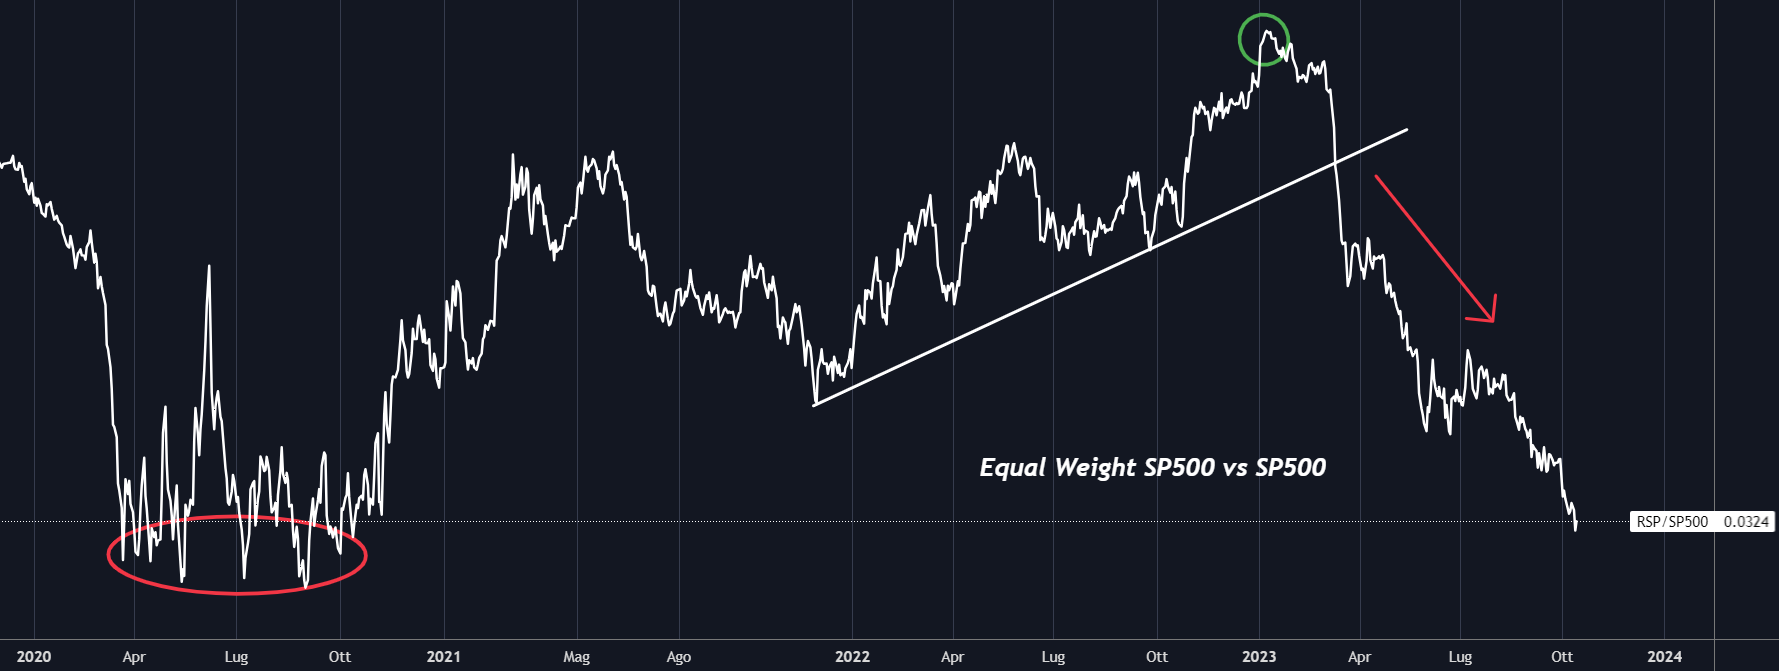 Equal Weight S&P 500 Vs. S&P 500